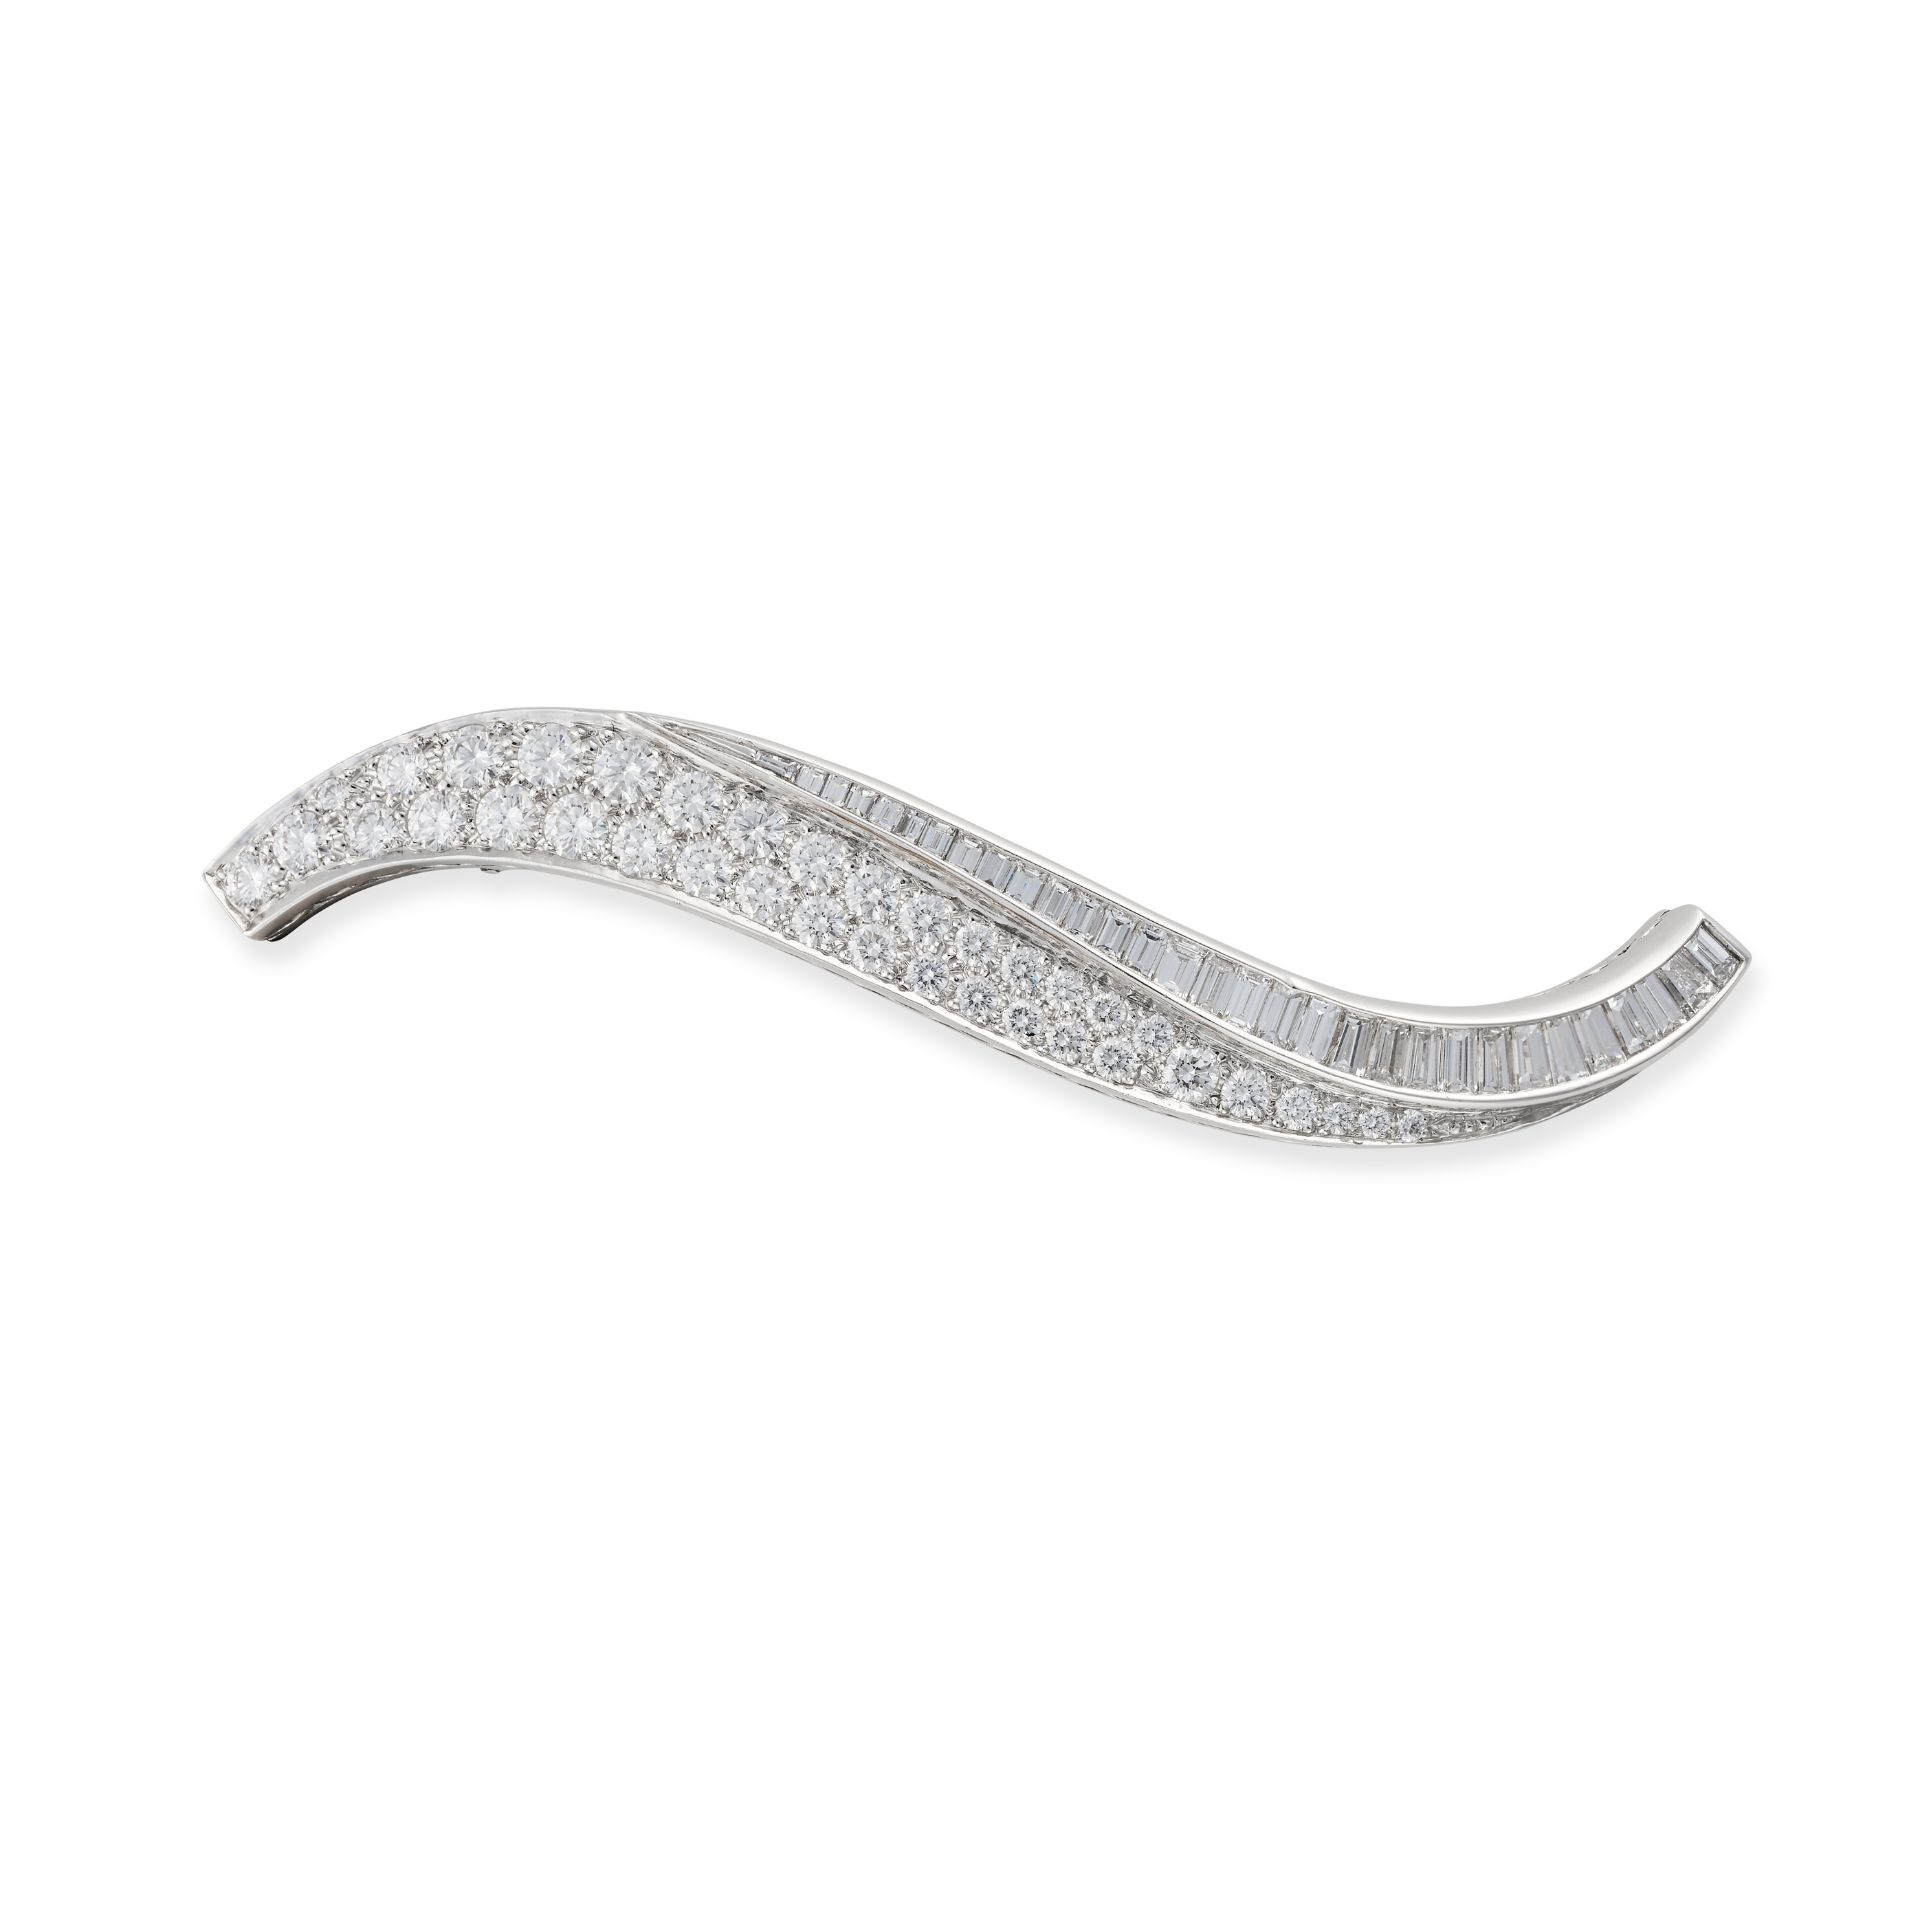 VAN CLEEF & ARPELS, A DIAMOND LA FLAMME BROOCH in platinum and white gold, designed as an abstrac...